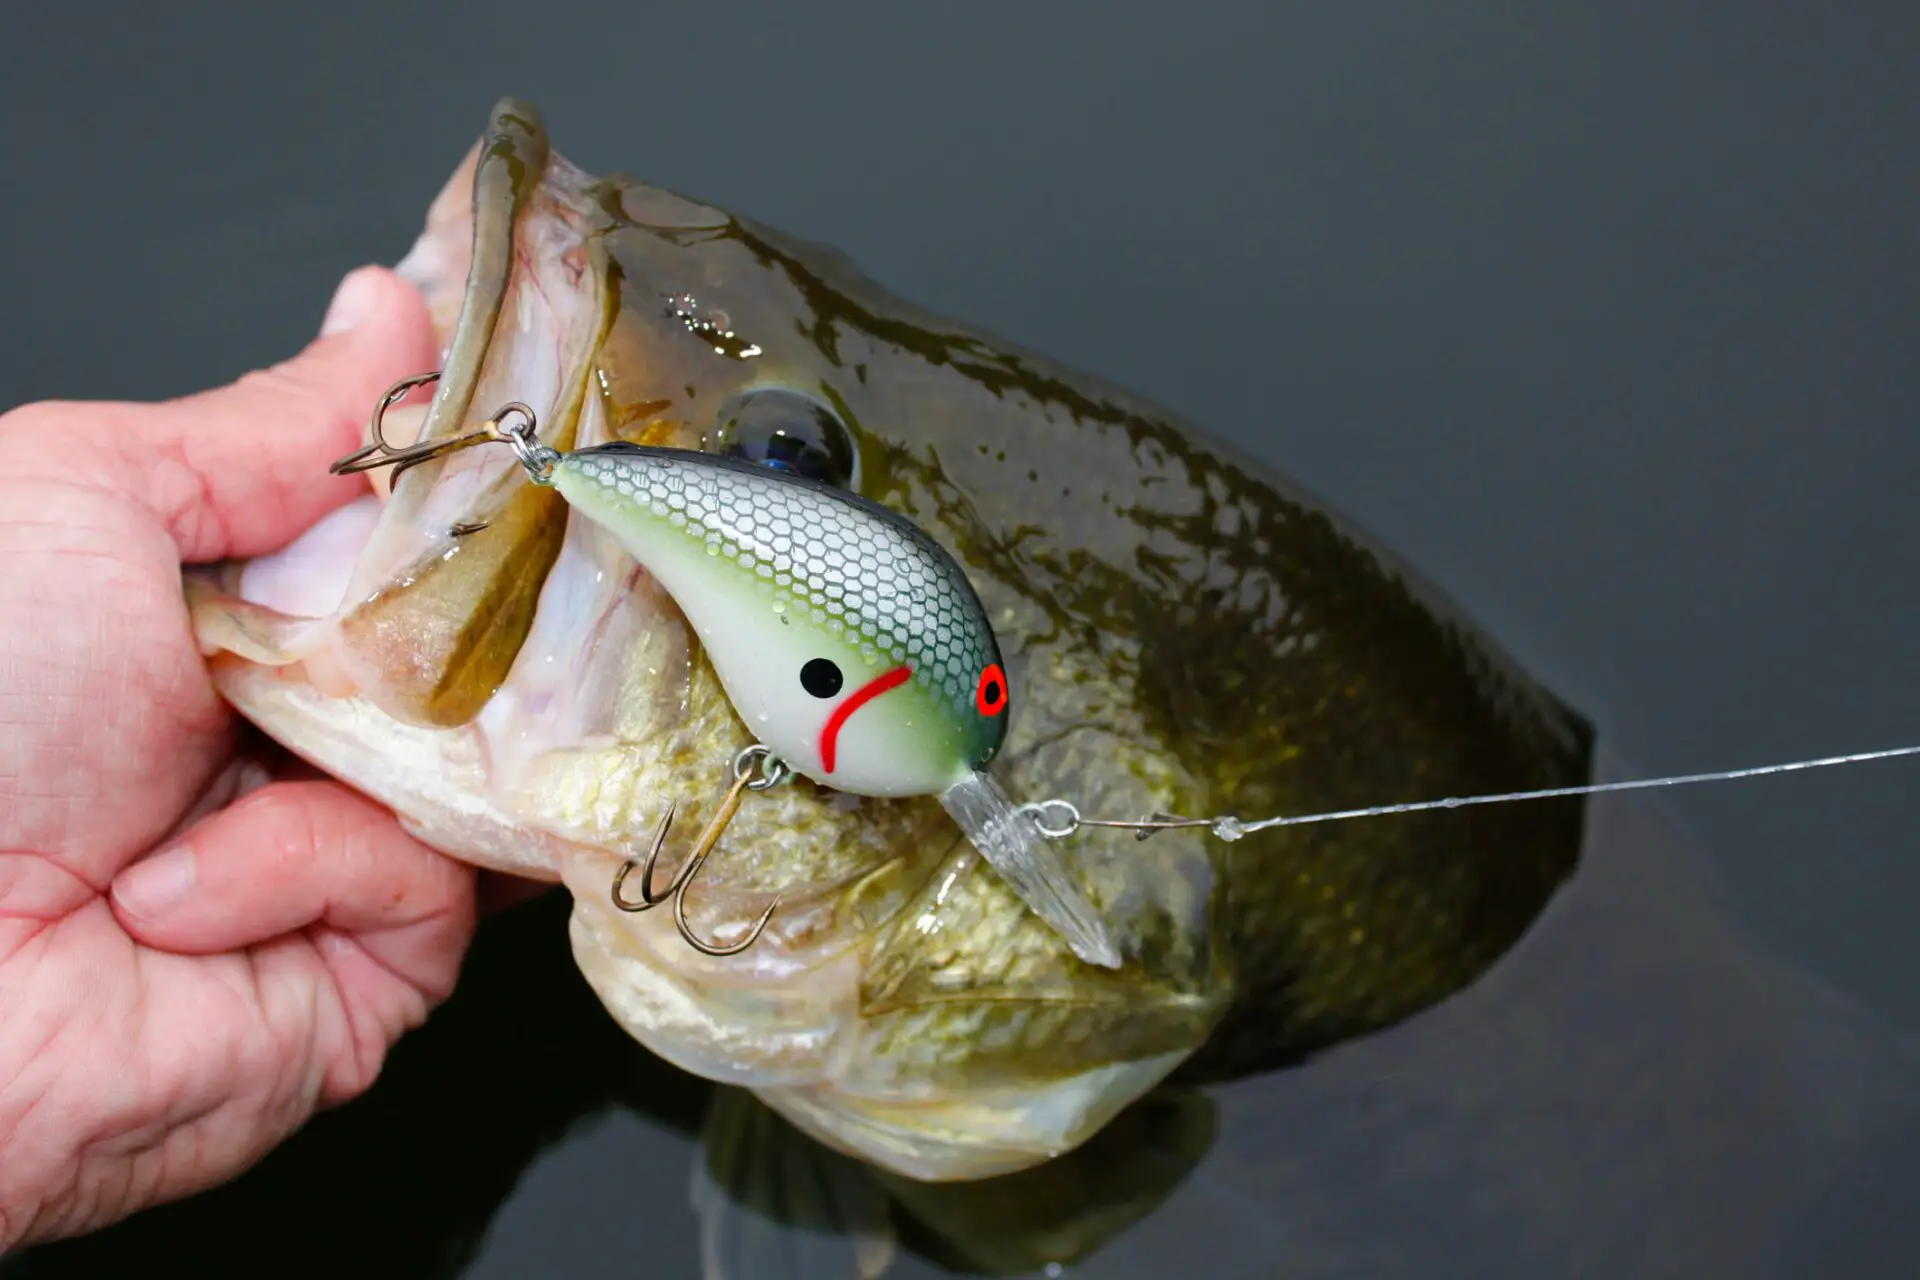 A crankbait lure for bass that brought a nice fish